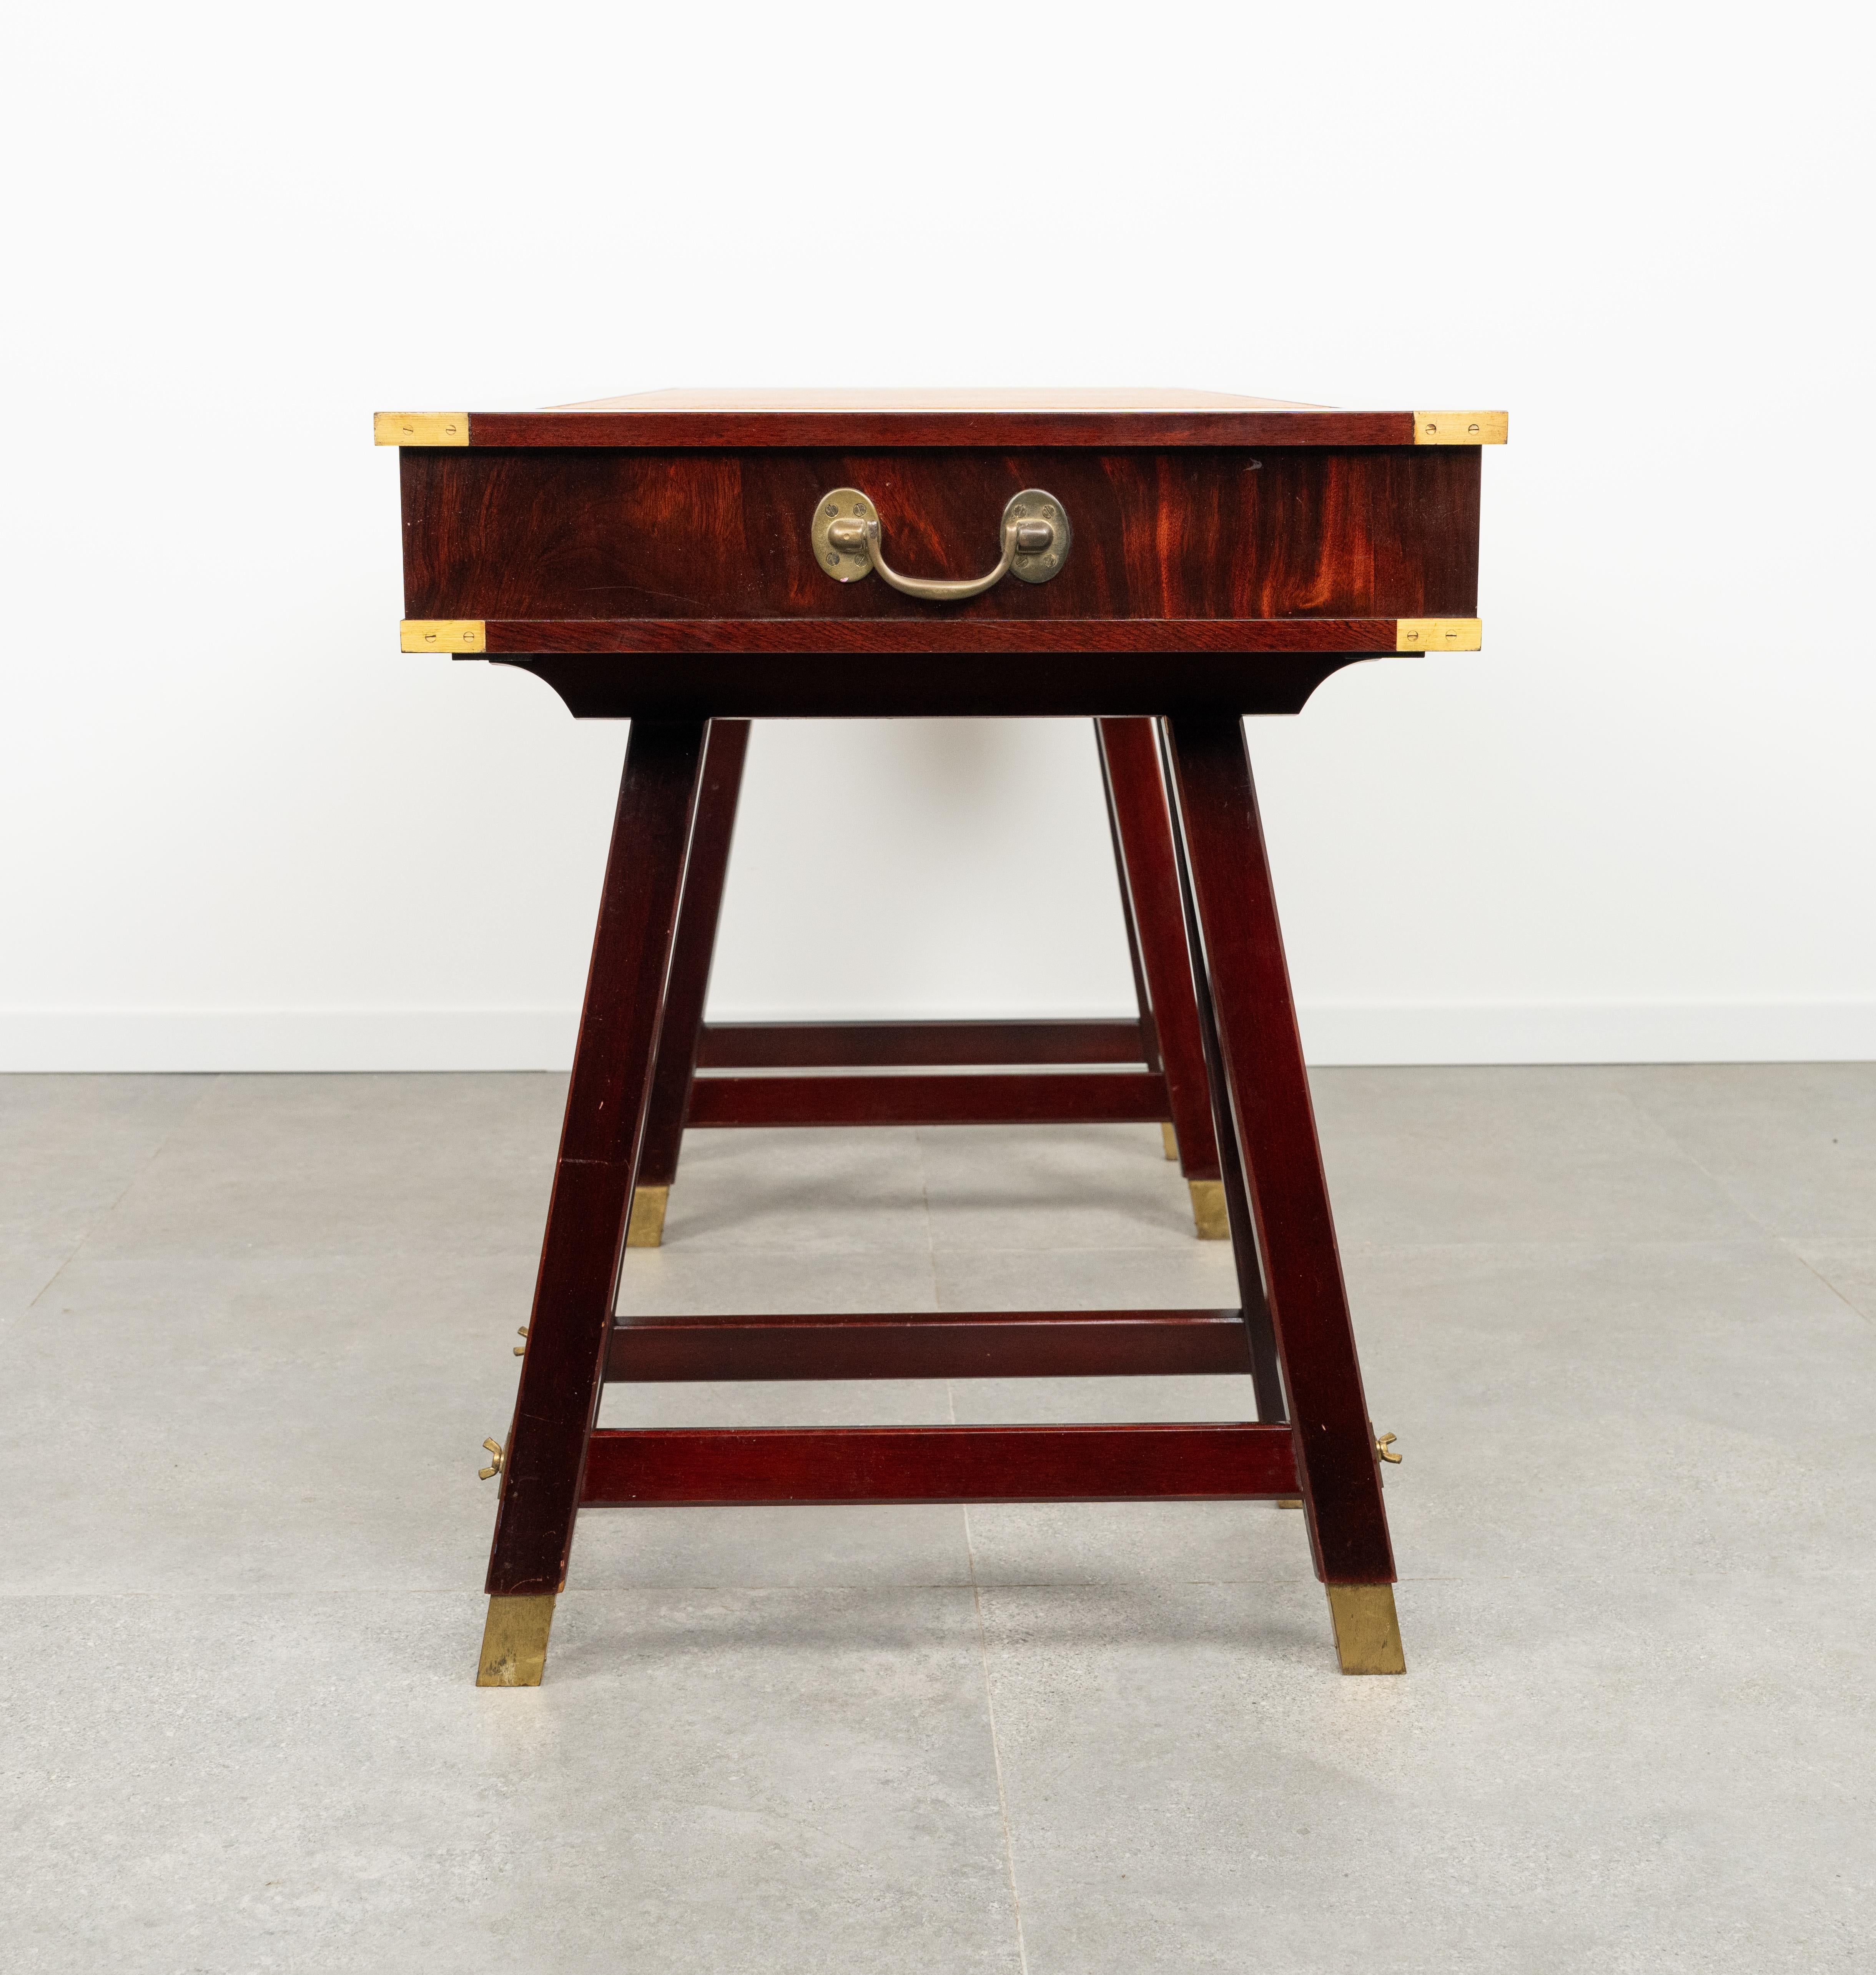 Military Campaign Style Desk Table in Wood, Brass and Leather, Italy 1960s For Sale 9